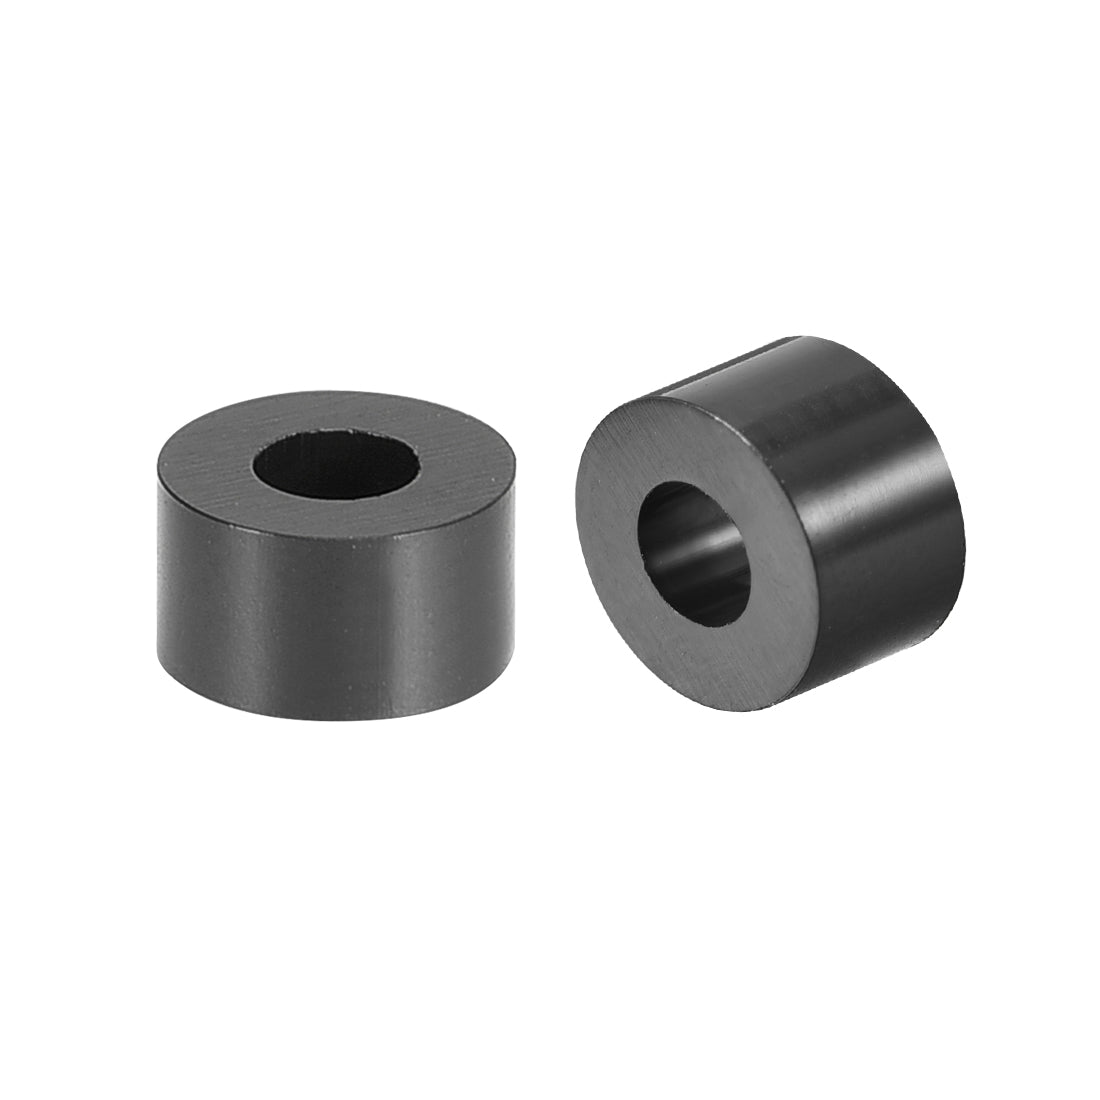 Uxcell Uxcell ABS Round Spacer Washer 5.4mm ID 9mm OD 5mm Height for M5 Screws Black 500Pcs